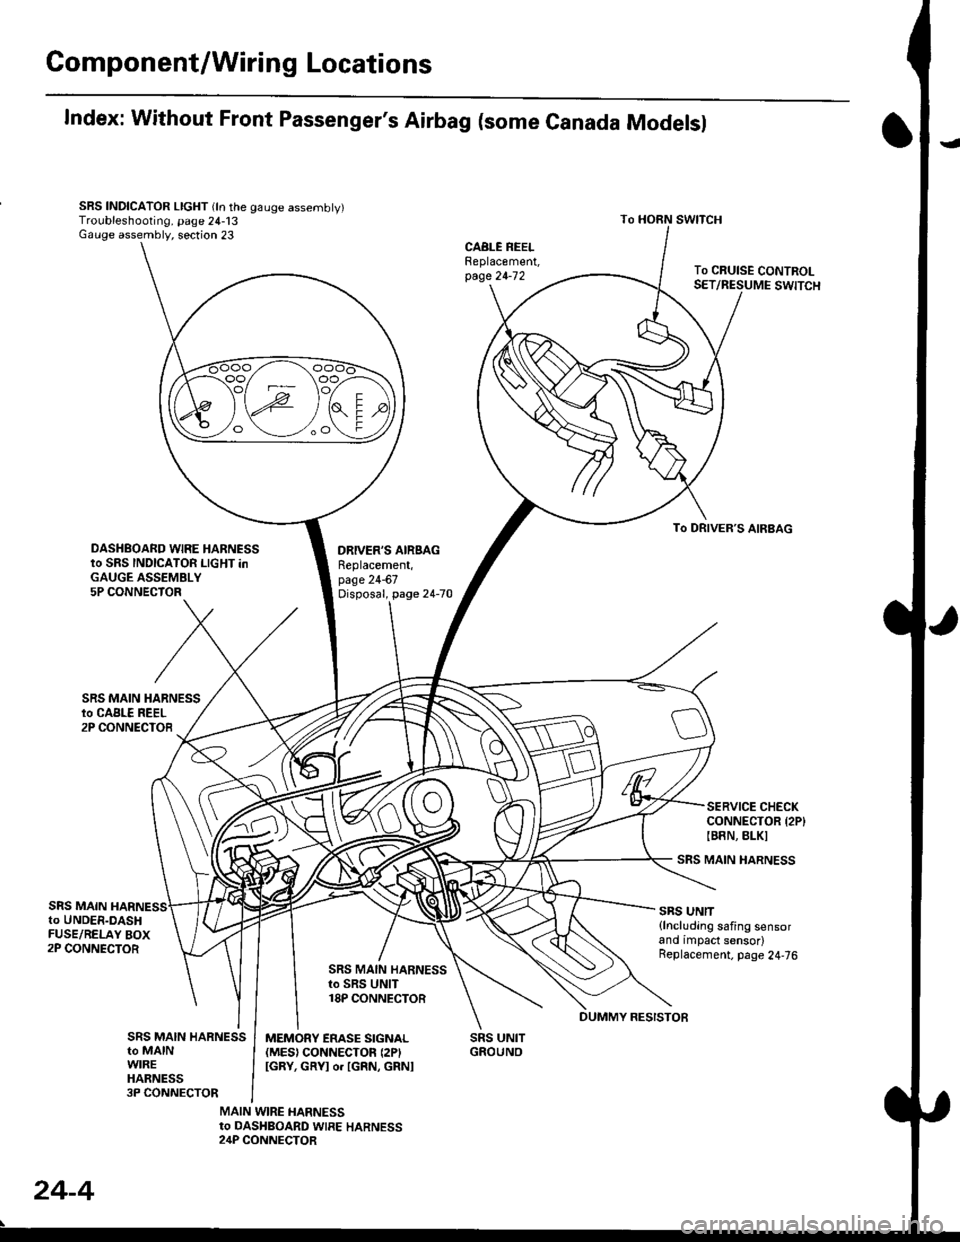 HONDA CIVIC 1999 6.G Workshop Manual Gomponent/Wiring Locations
Index: Without Front Passengers Airbag (some Canada Modelsl
SRS INDICATOR LIGHT (ln the gauge assembly)Troubleshooting, page 24-13Gauge assembly, section 23
DRIVERS AIRSAG